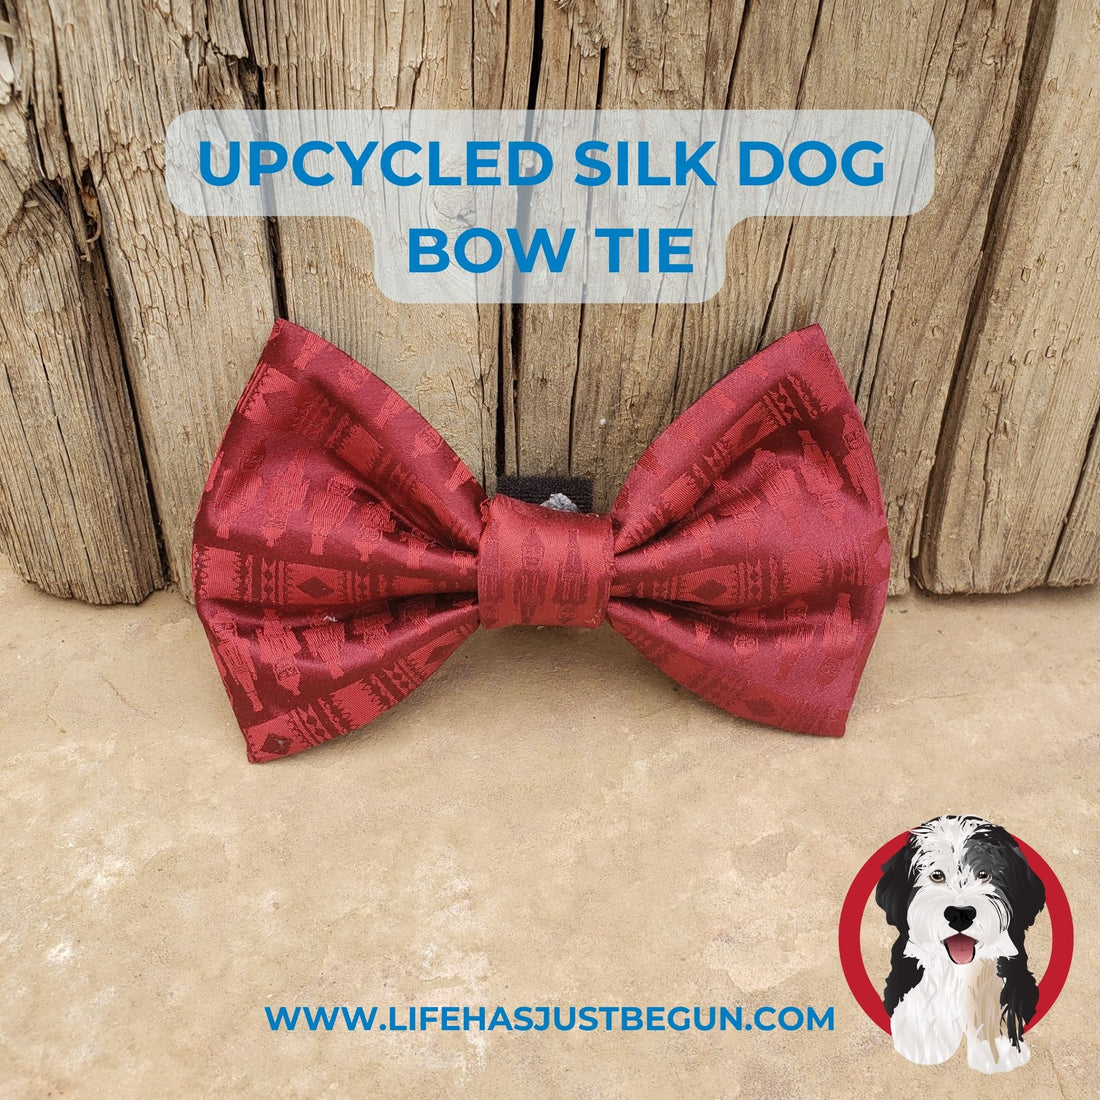 This ruby red silk dog bow tie was repurposed from a new, never worn mens neck tie. - Life Has Just Begun